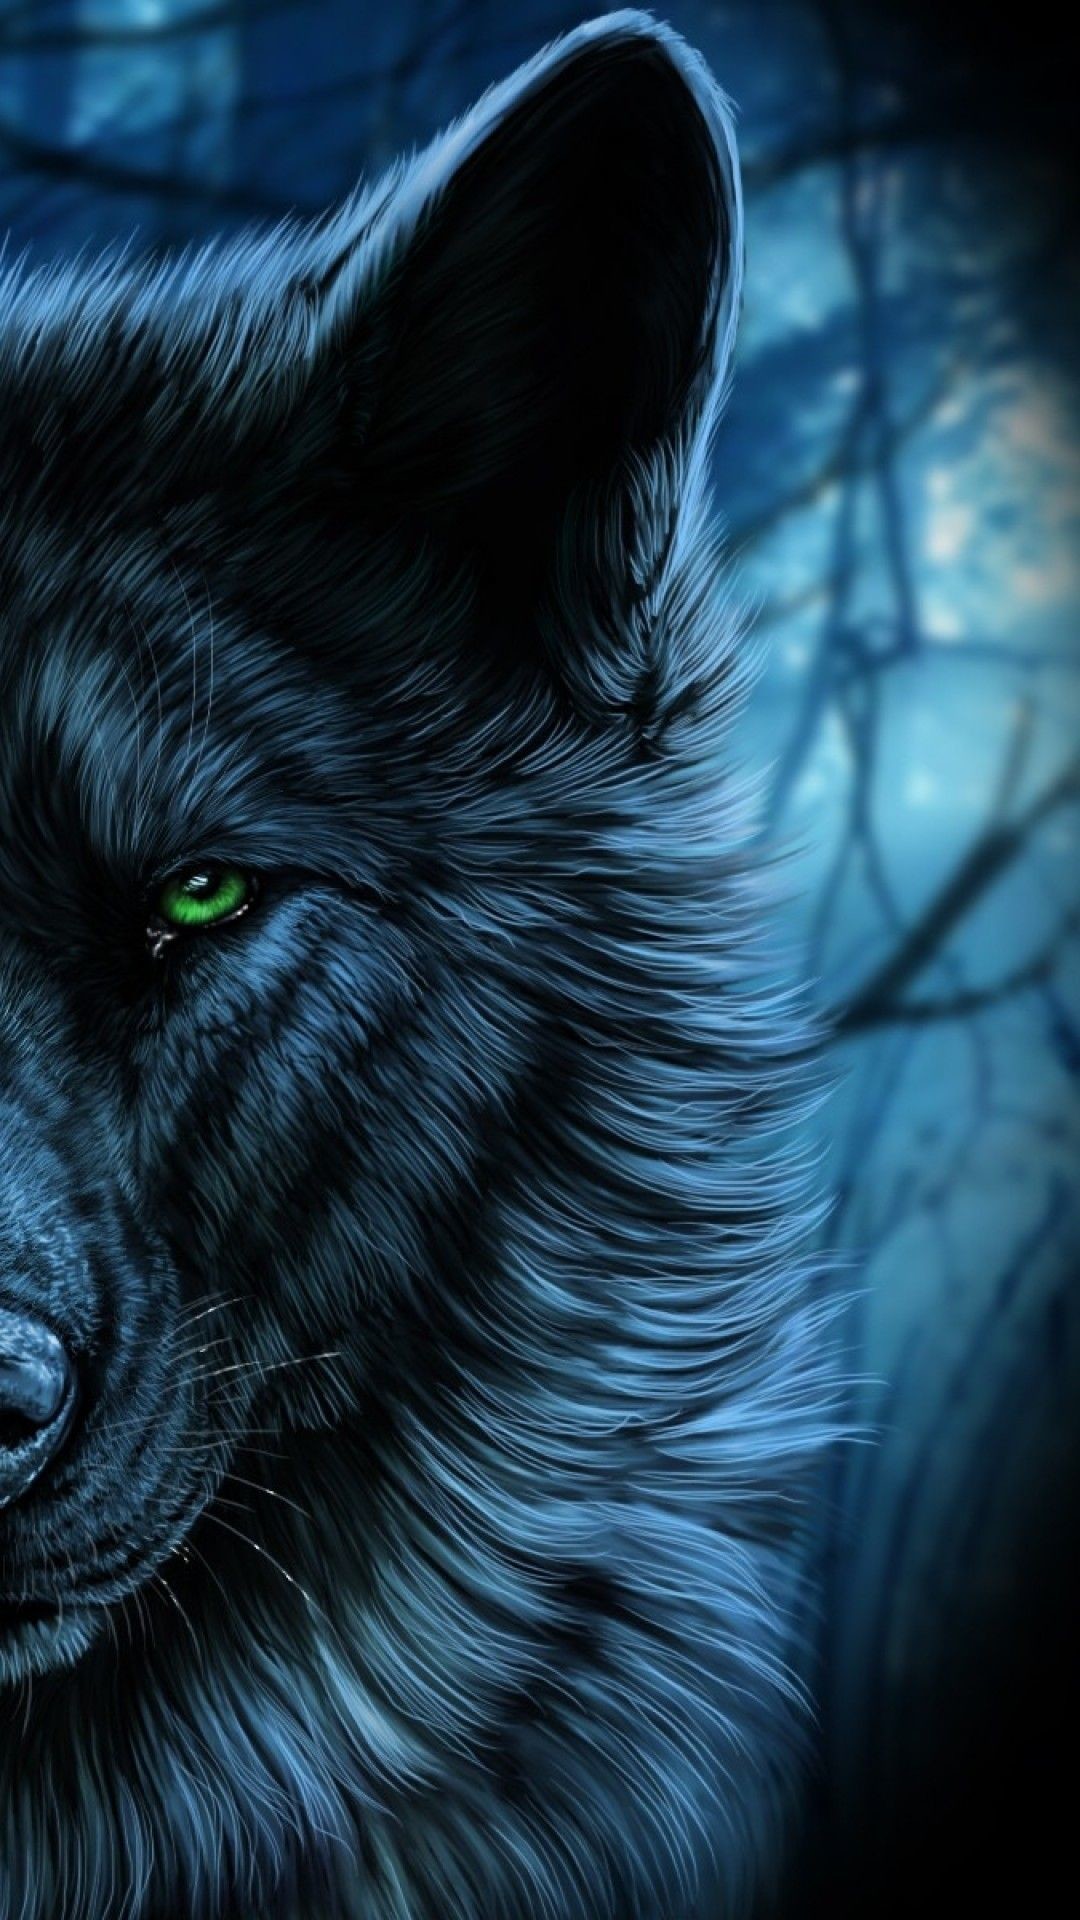 Moving Wolf Wallpaper Image